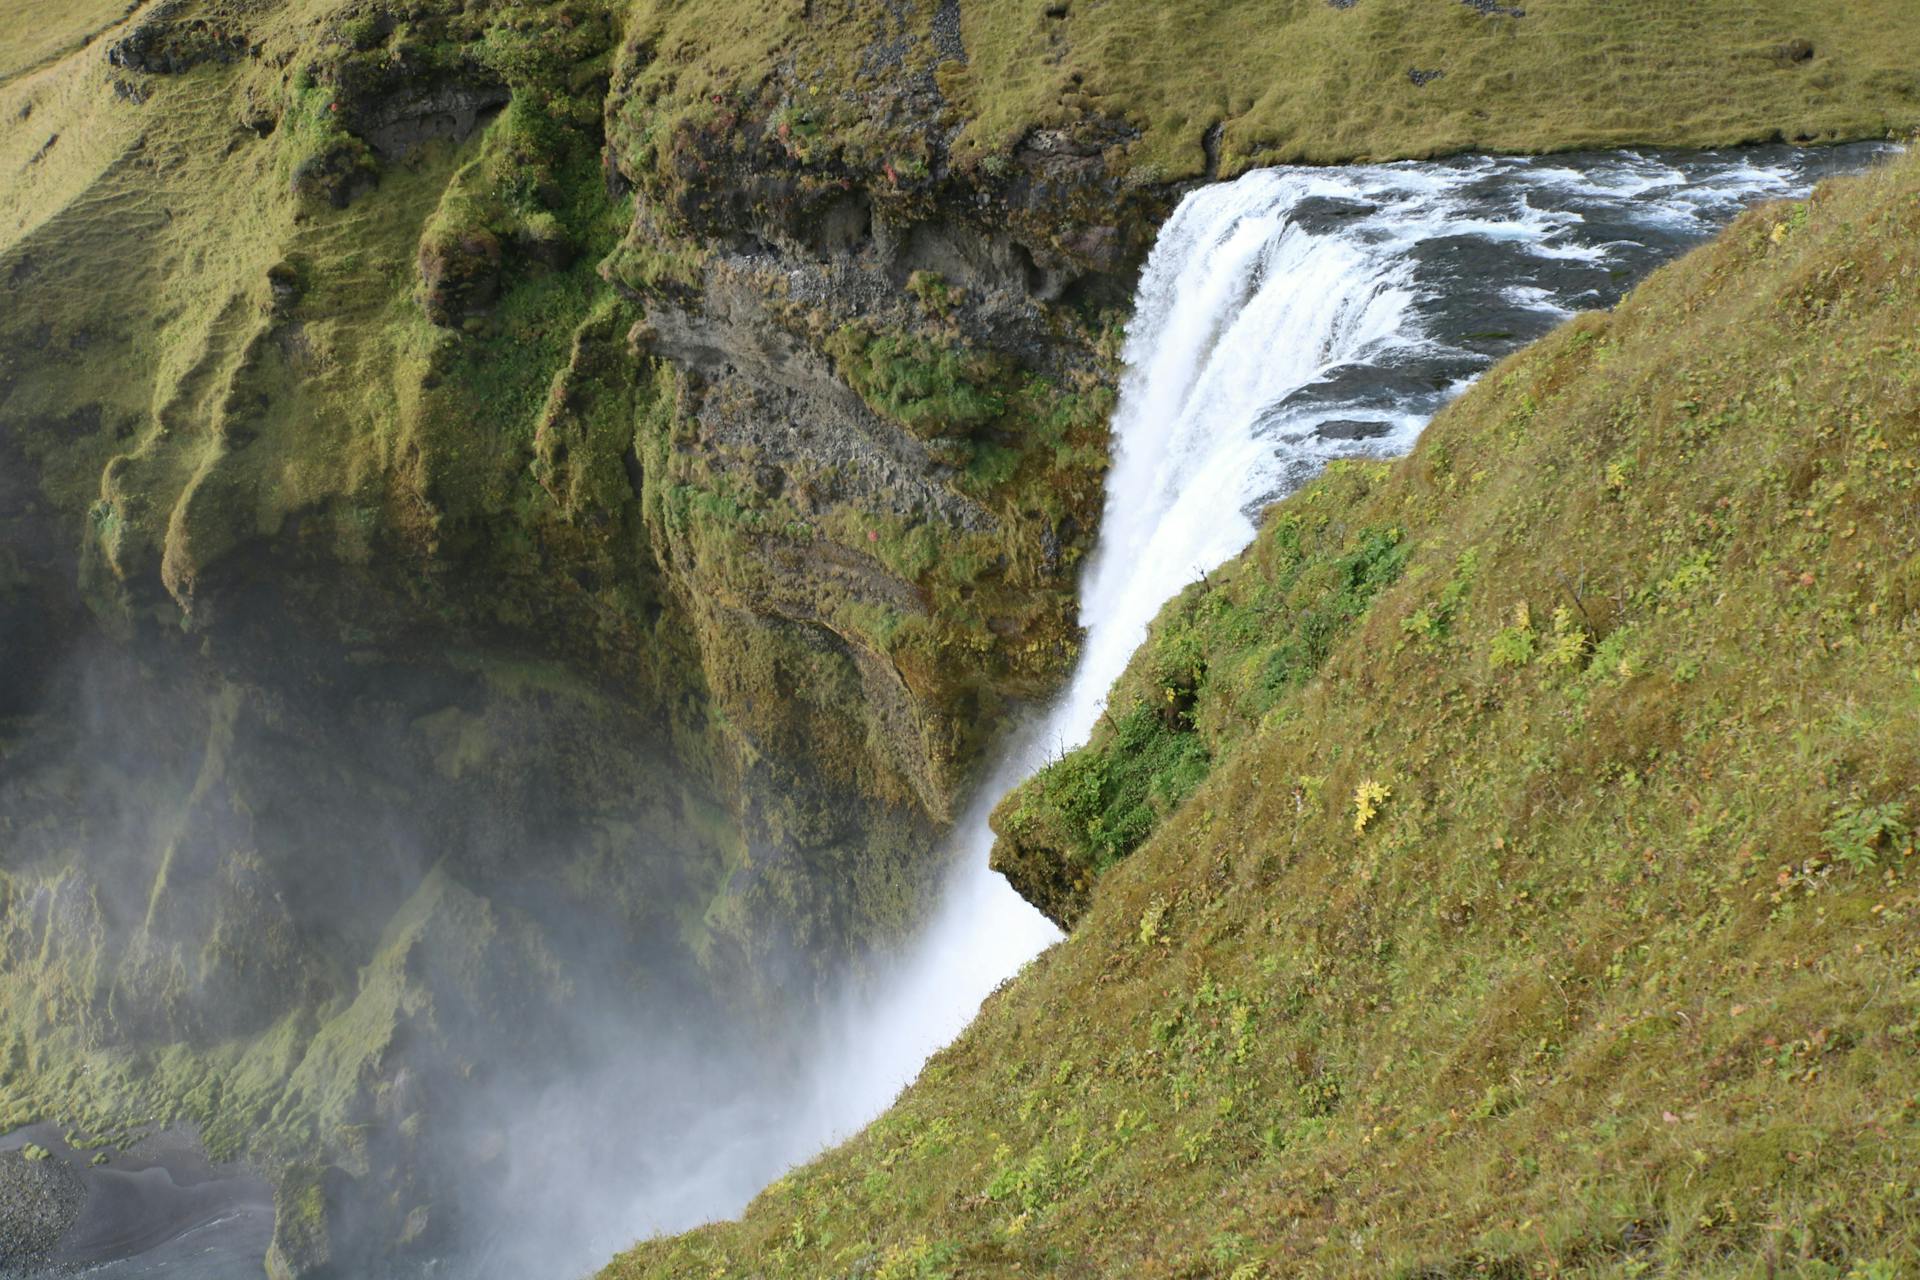 Skógafoss from above